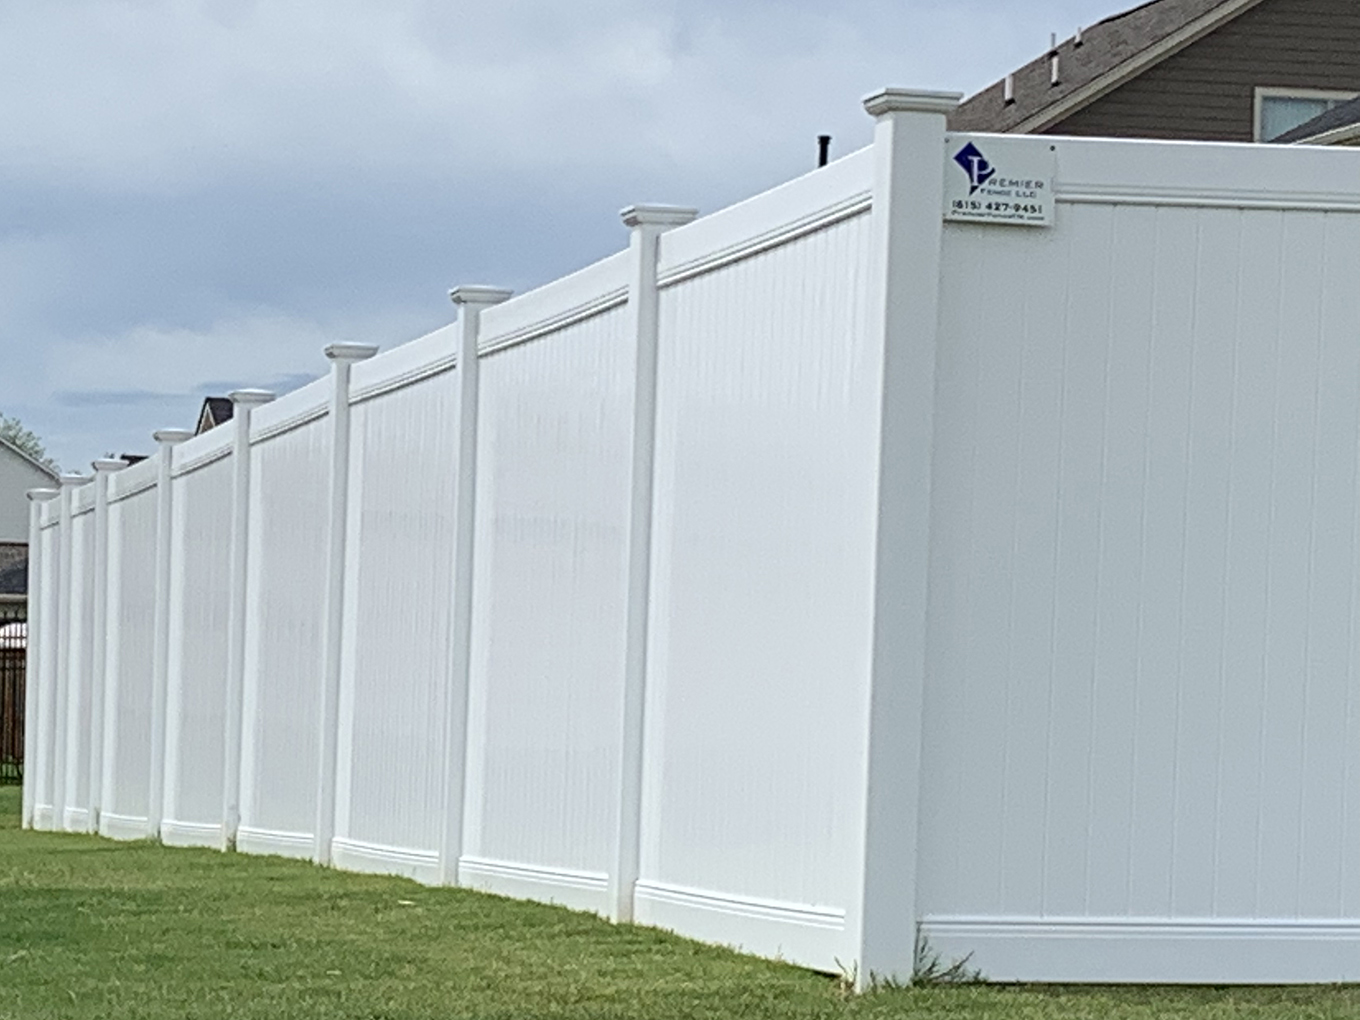 Vinyl fence options in the Hendersonville, Tennessee area.